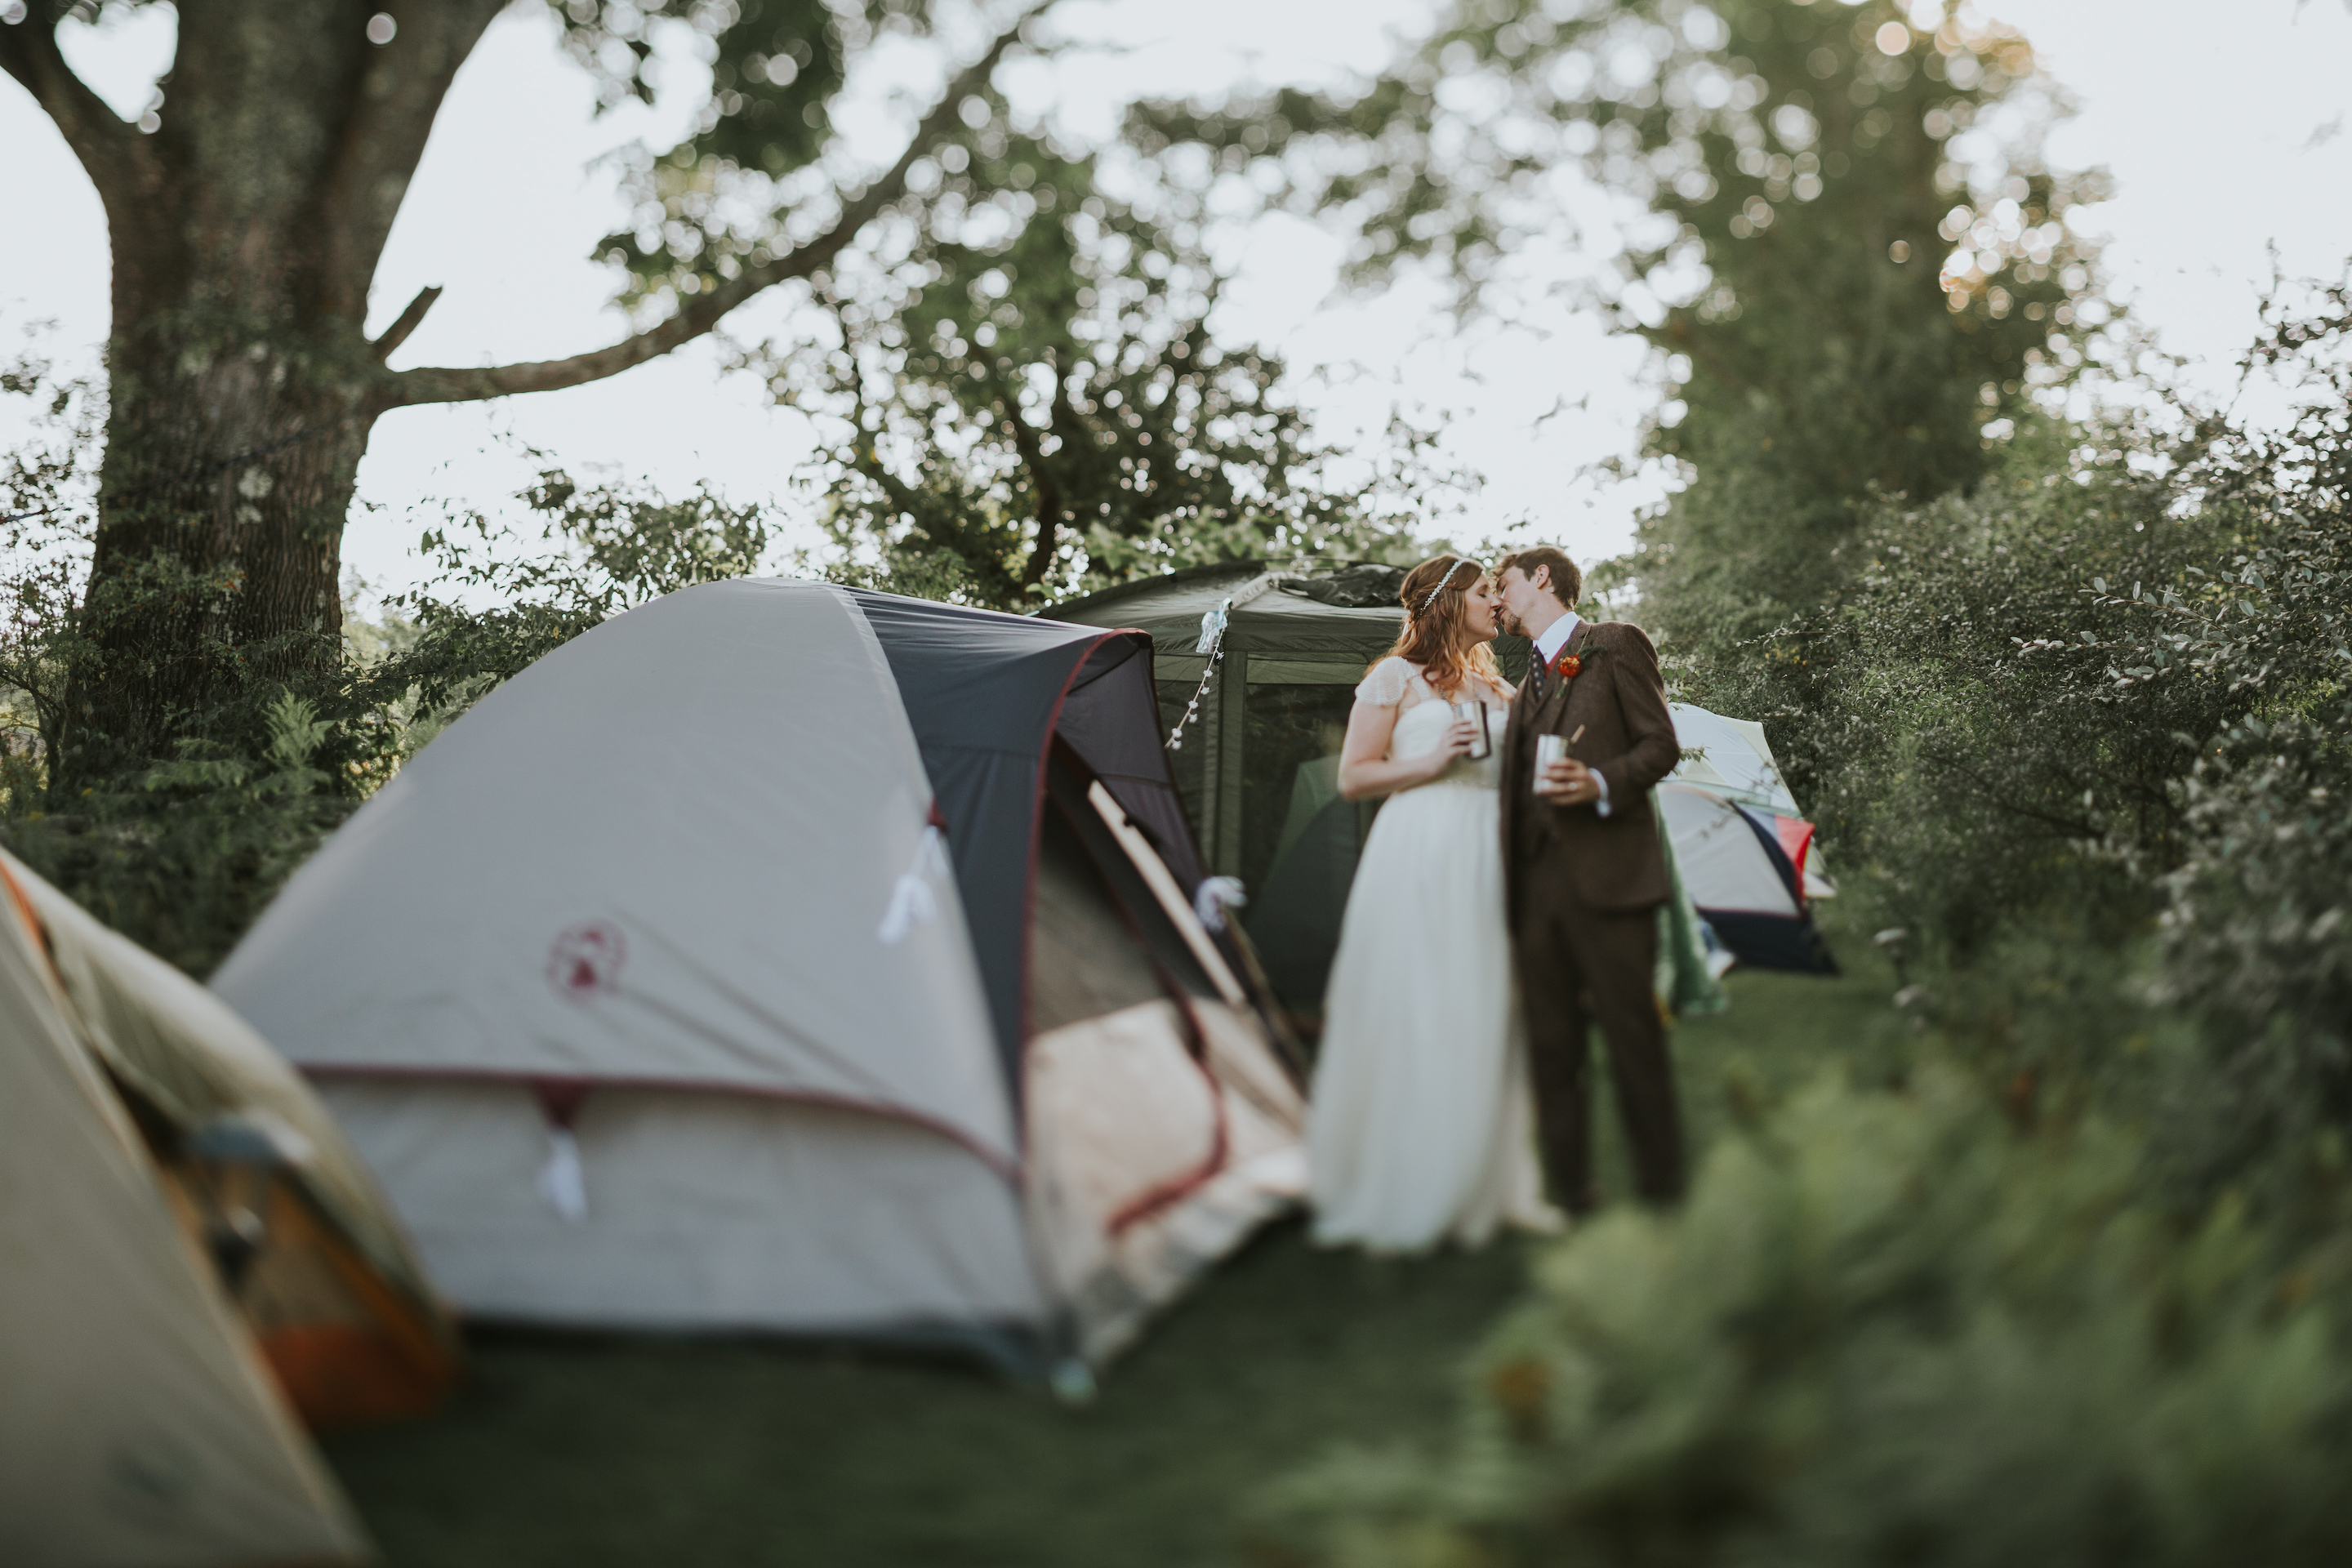 A couple kiss on their wedding day while surrounded by camping tents.